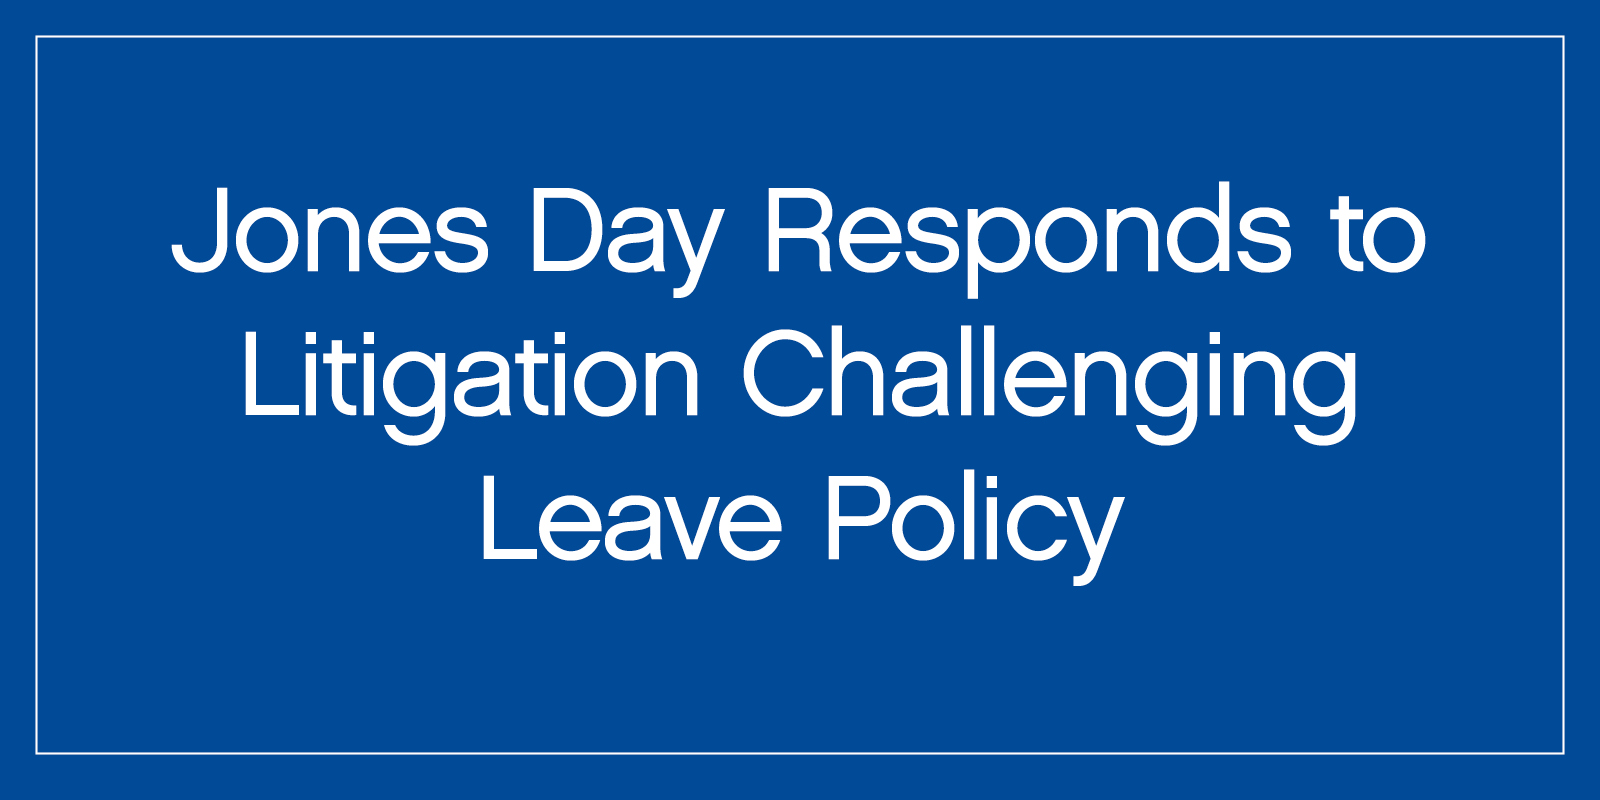 Jones Day responds to litigation challenging leave policy.